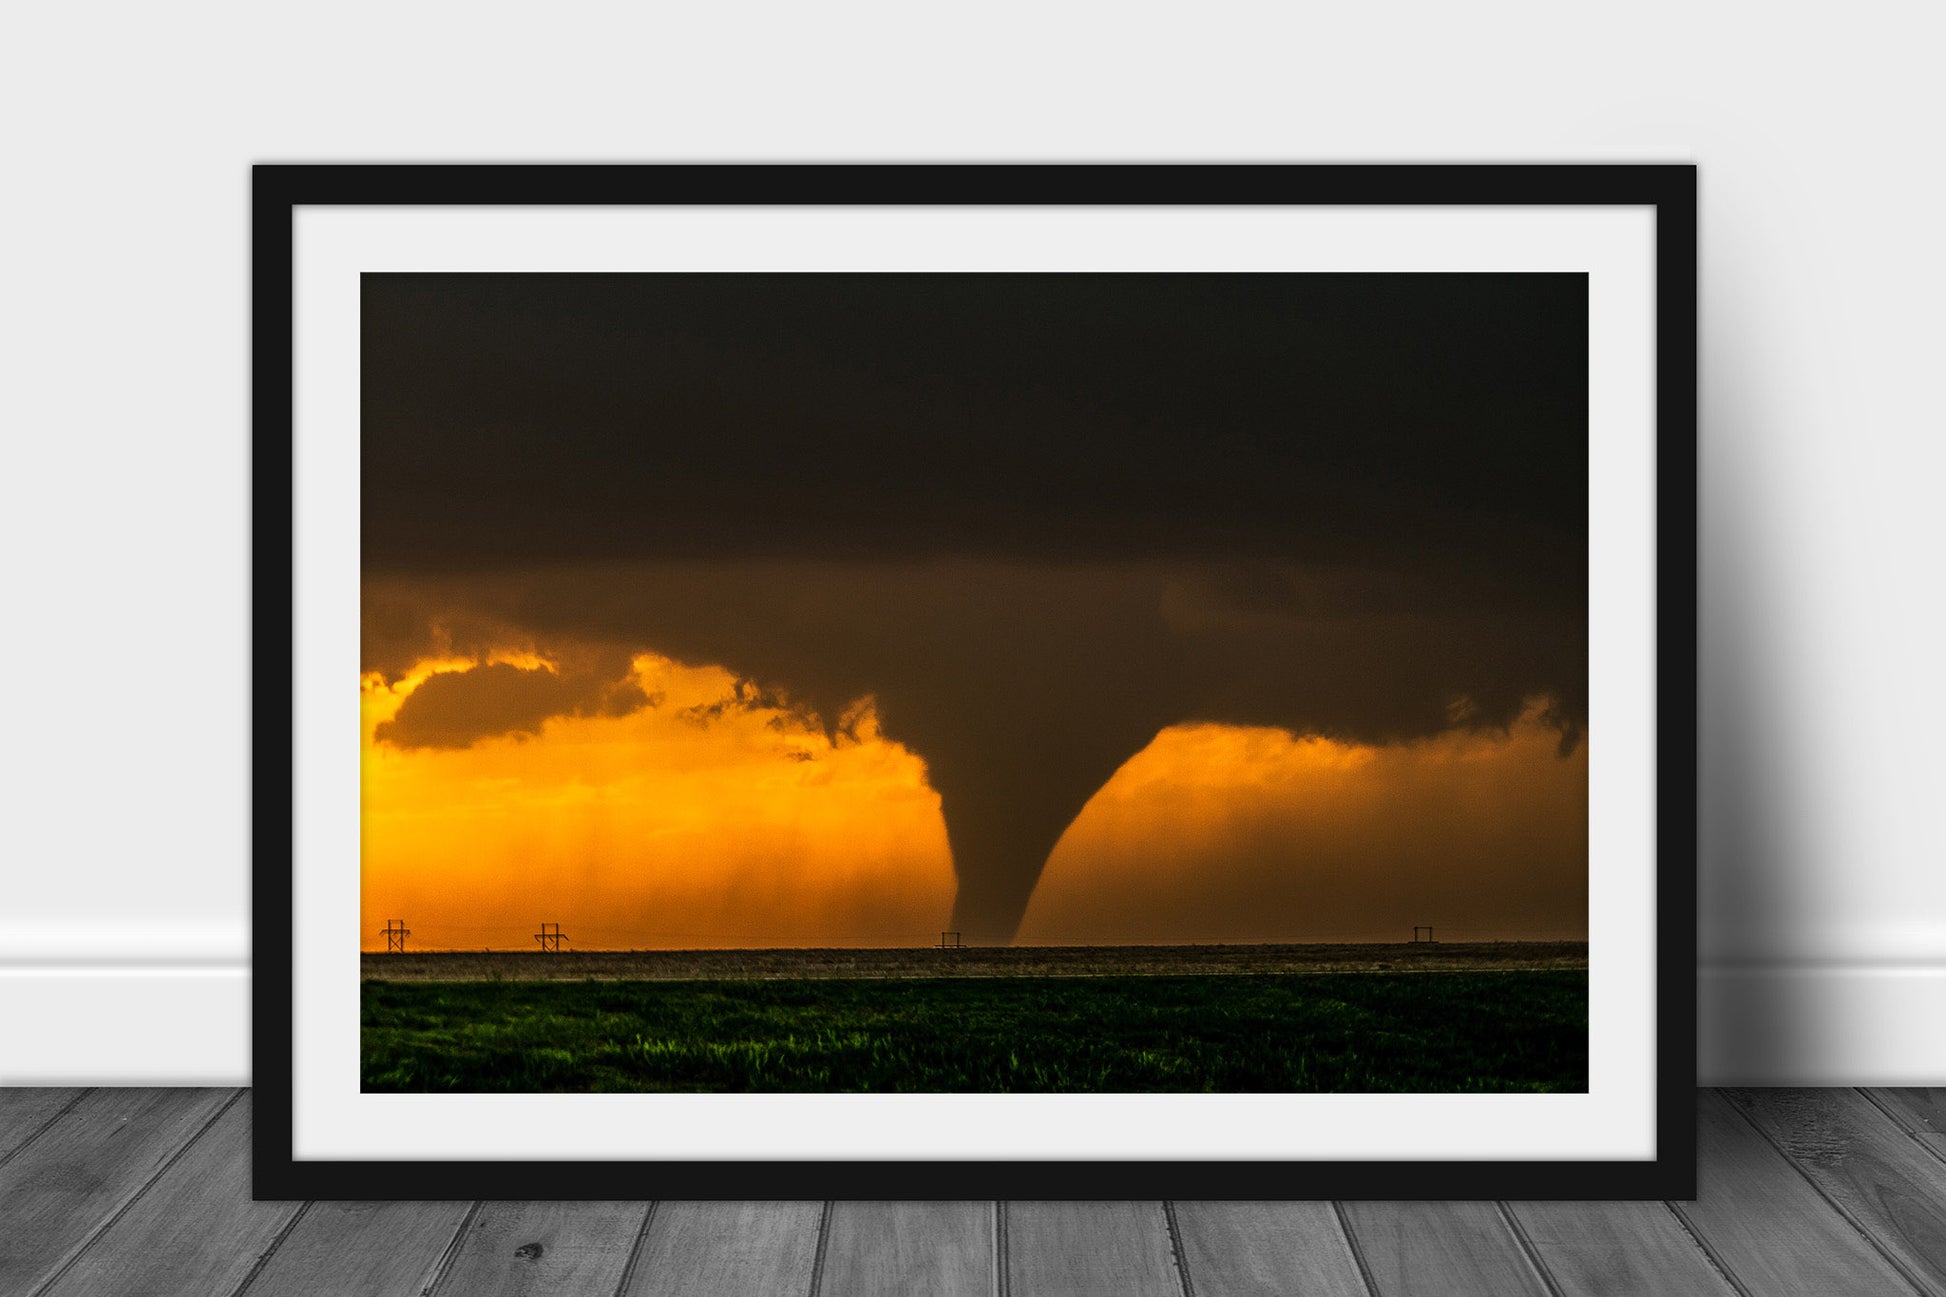 Framed and matted weather print of a large tornado appearing as a silhouette against the evening sky at sunset on a stormy spring day in Kansas by Sean Ramsey of Southern Plains Photography.